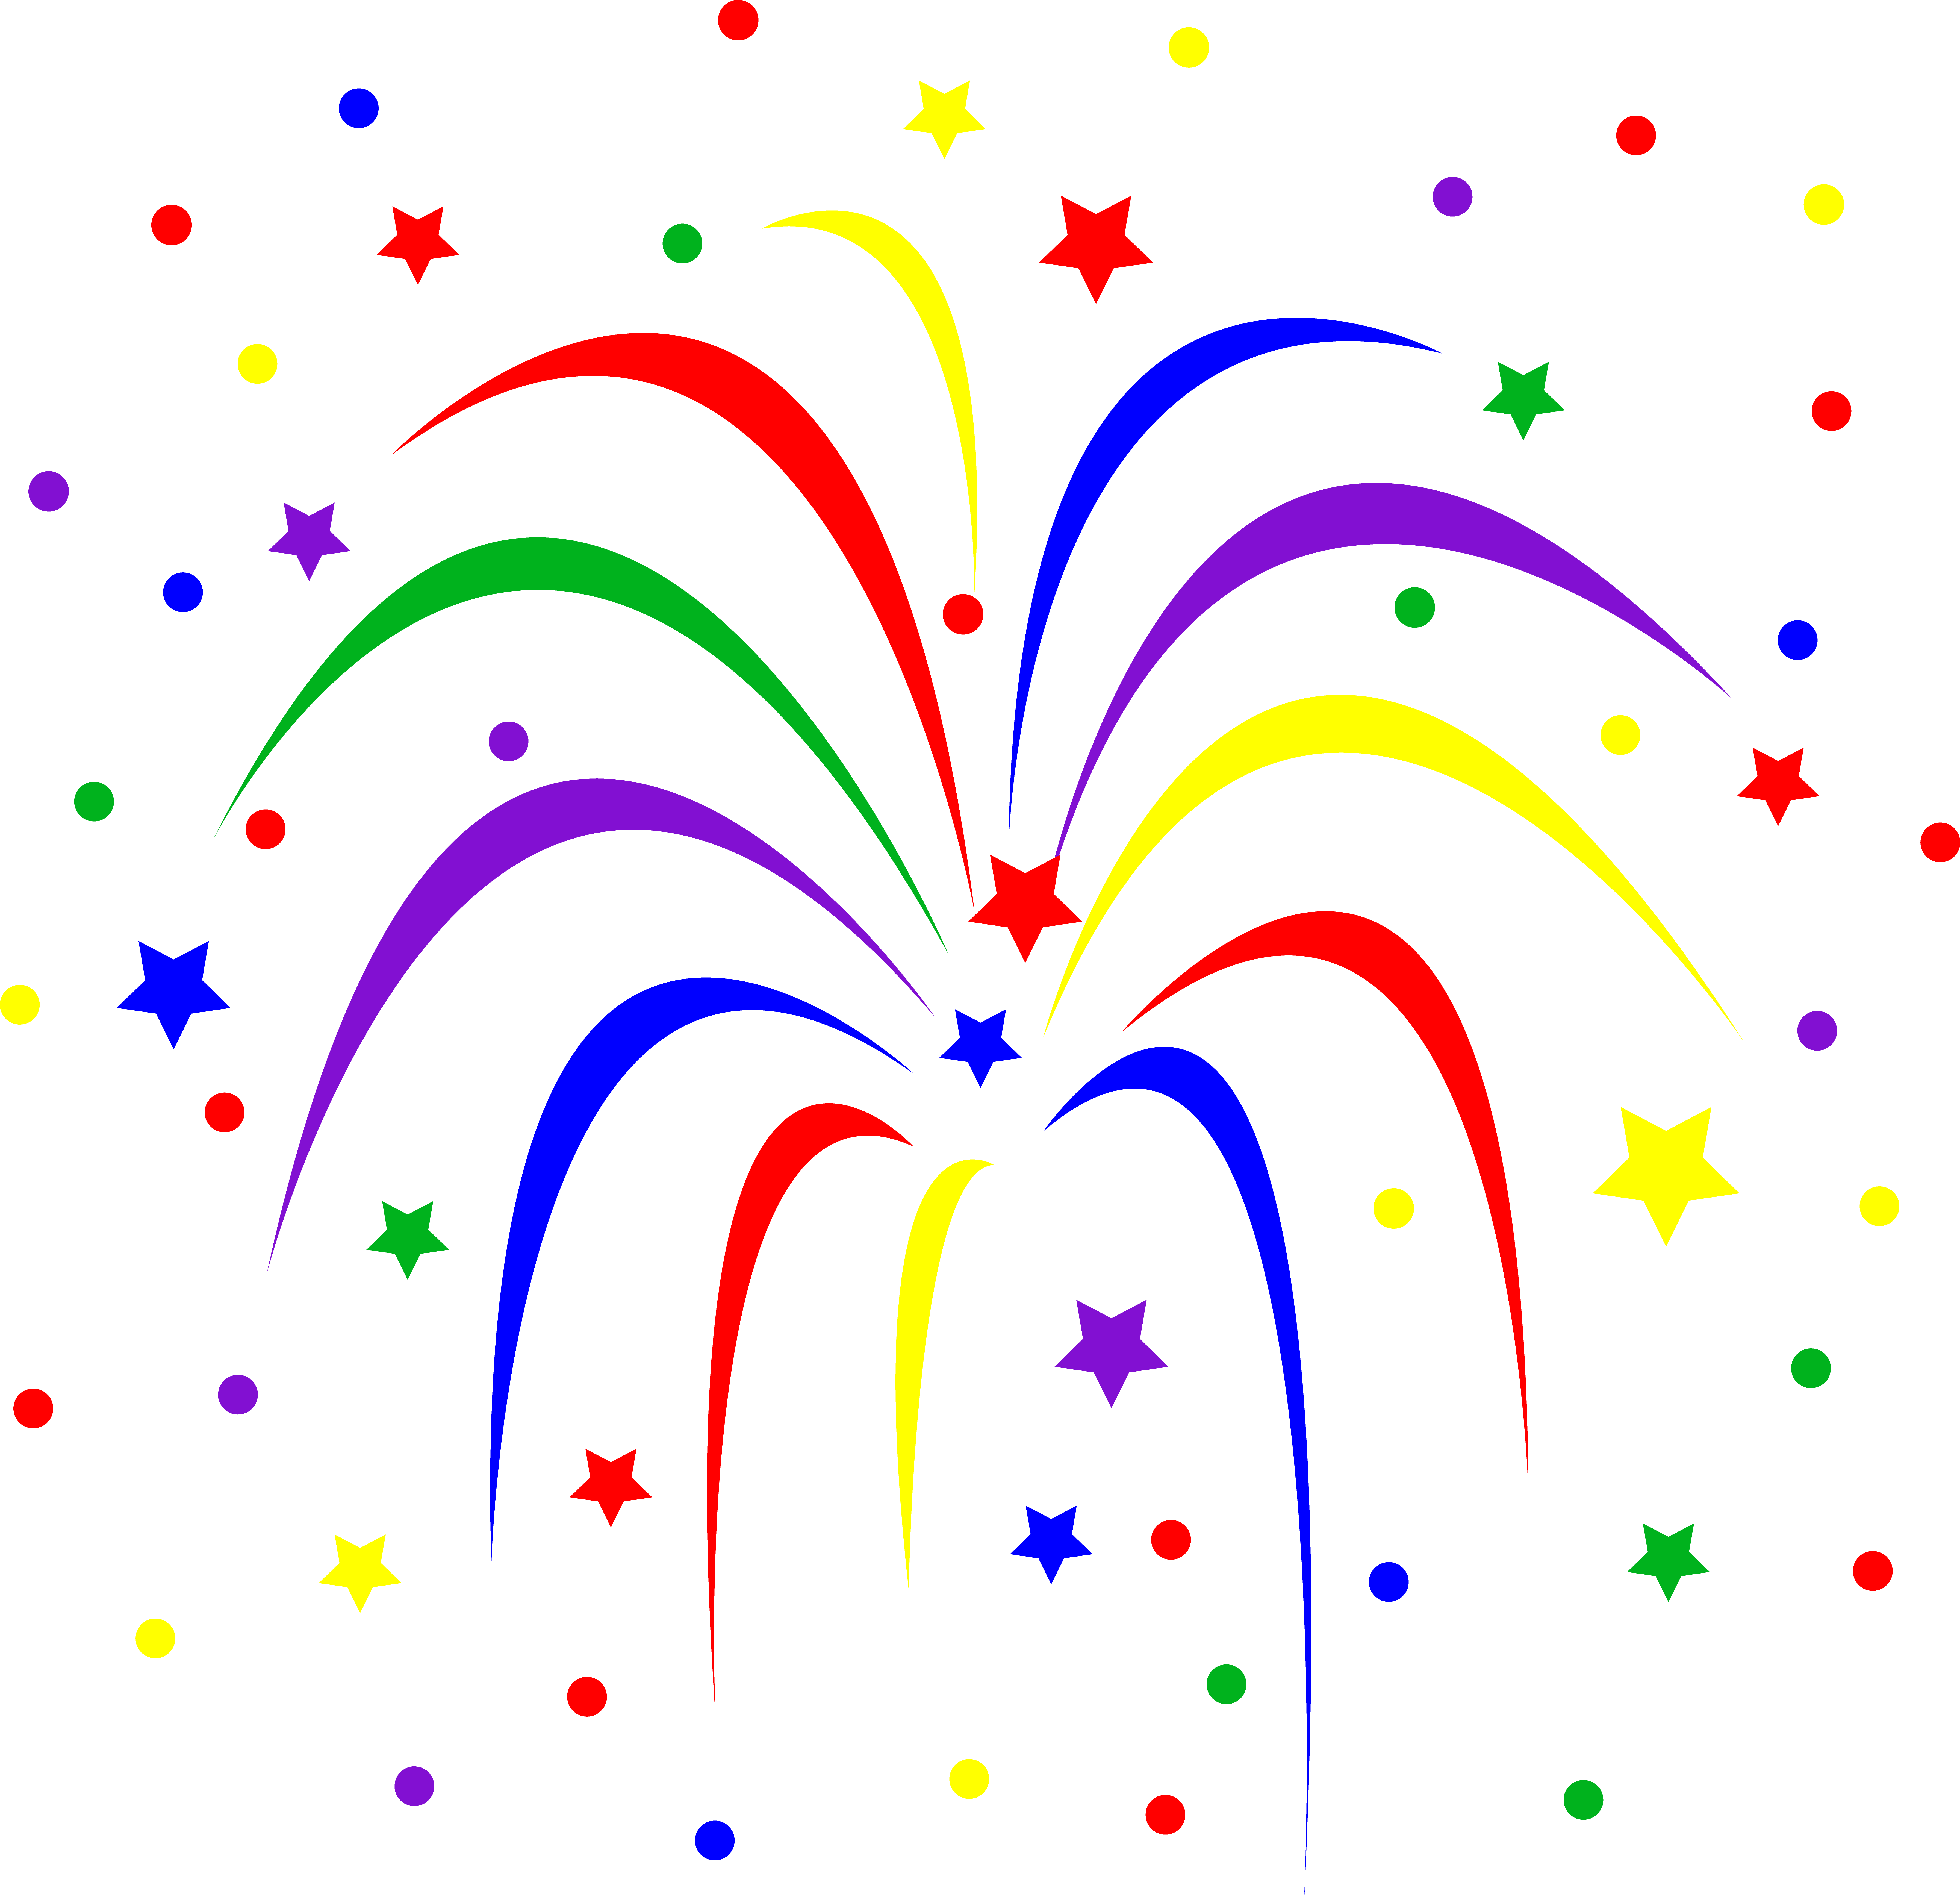 Fireworks Clip Art Images Free | Clipart Panda - Free Clipart Images